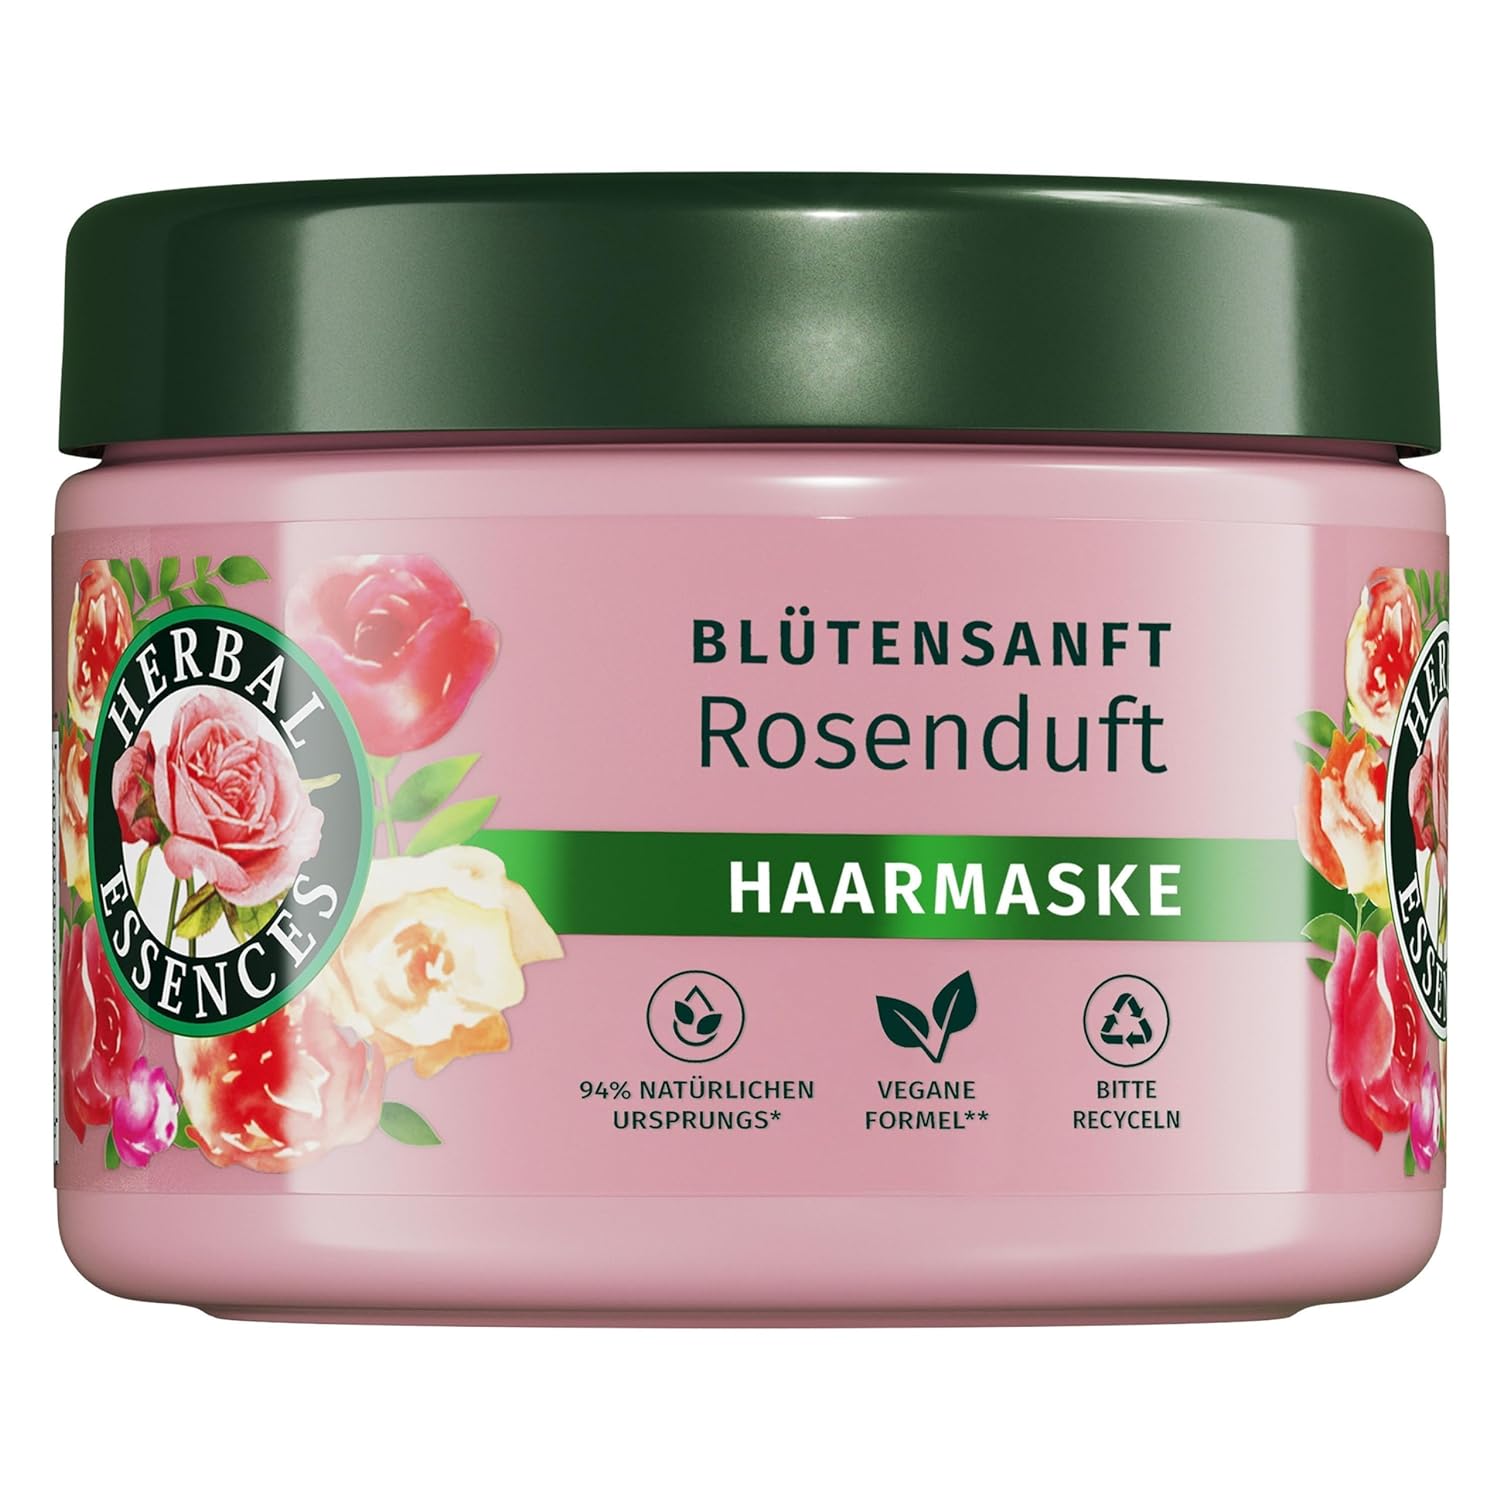 Herbal Essences Blumensanft Hair Mask with Rose Fragrance 300 ml From Dull Hair to Silky Shiny Hair, With Rose Essence, Ingredients of Natural Origin, Vegan